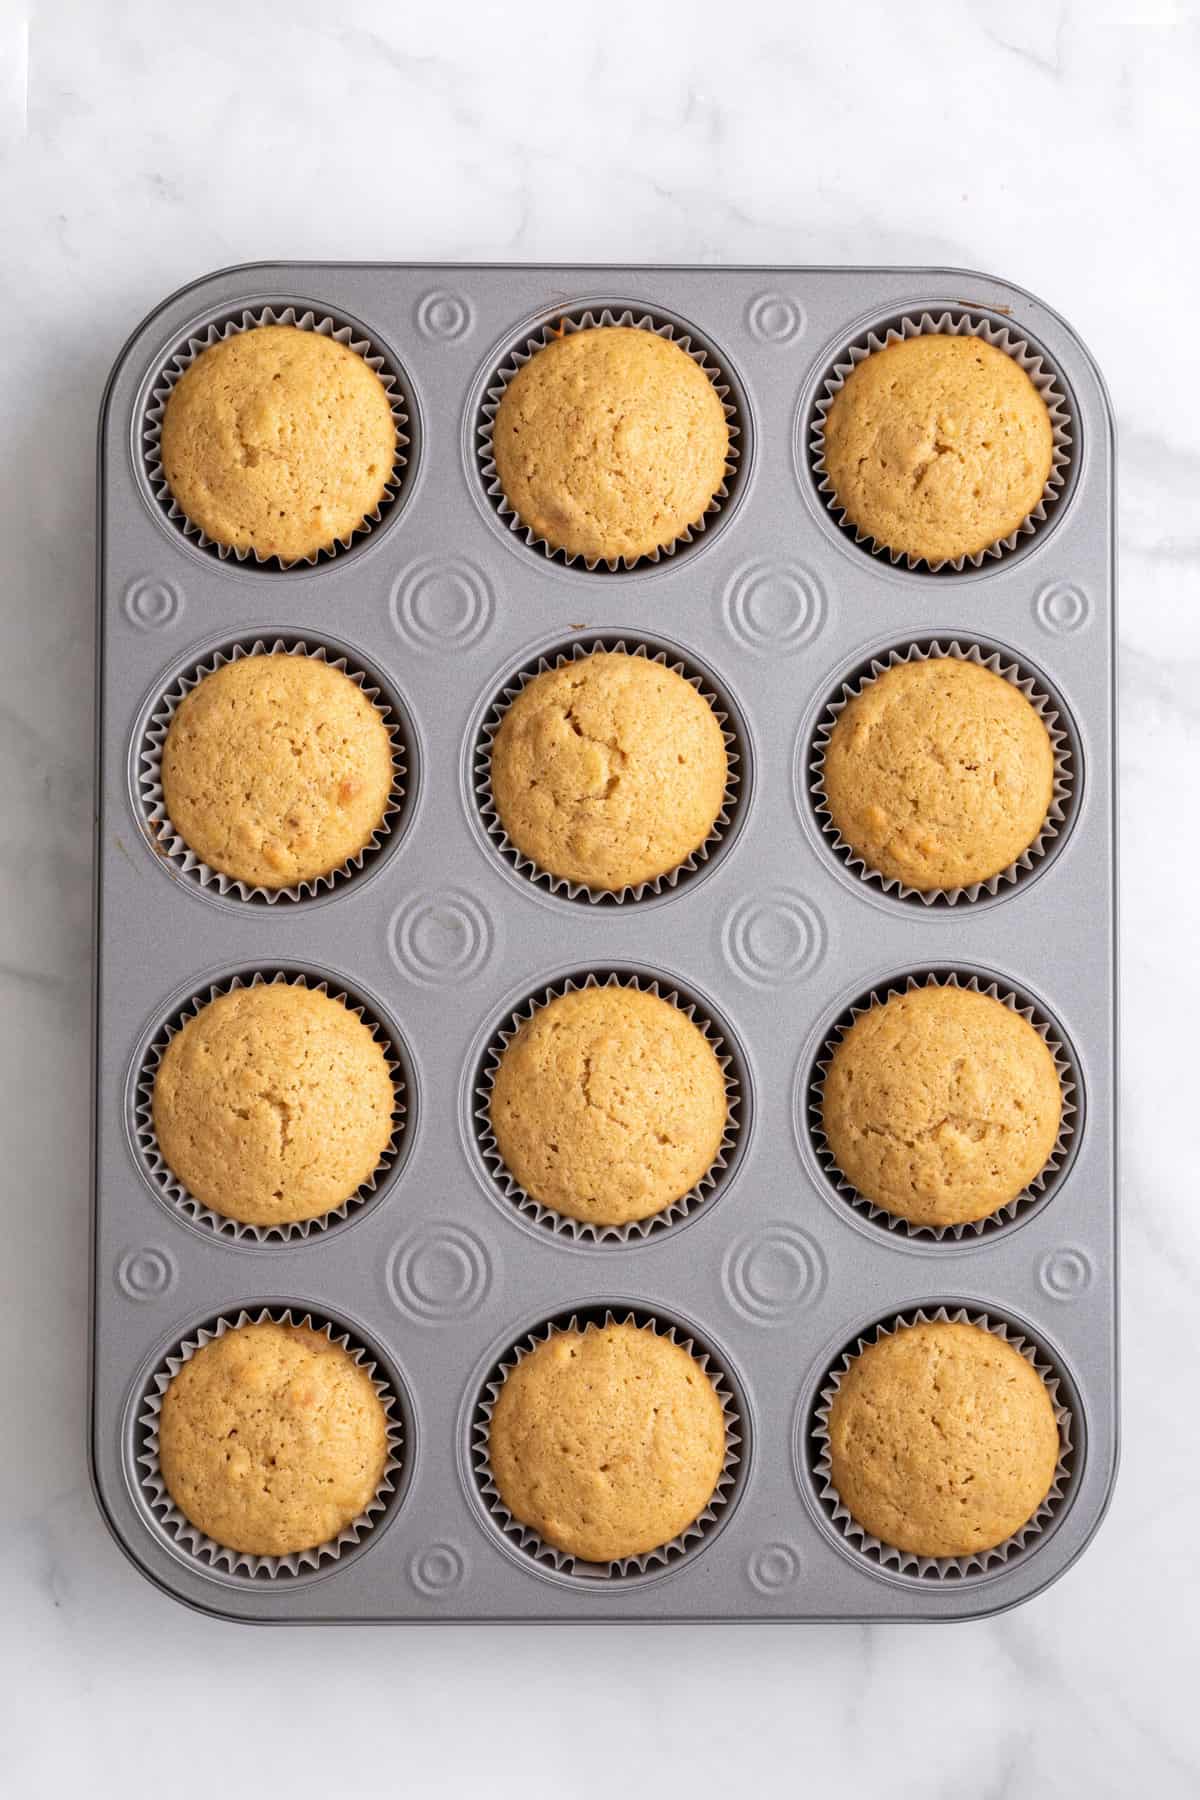 12 baked banana pudding cupcakes sitting in a muffin tin.